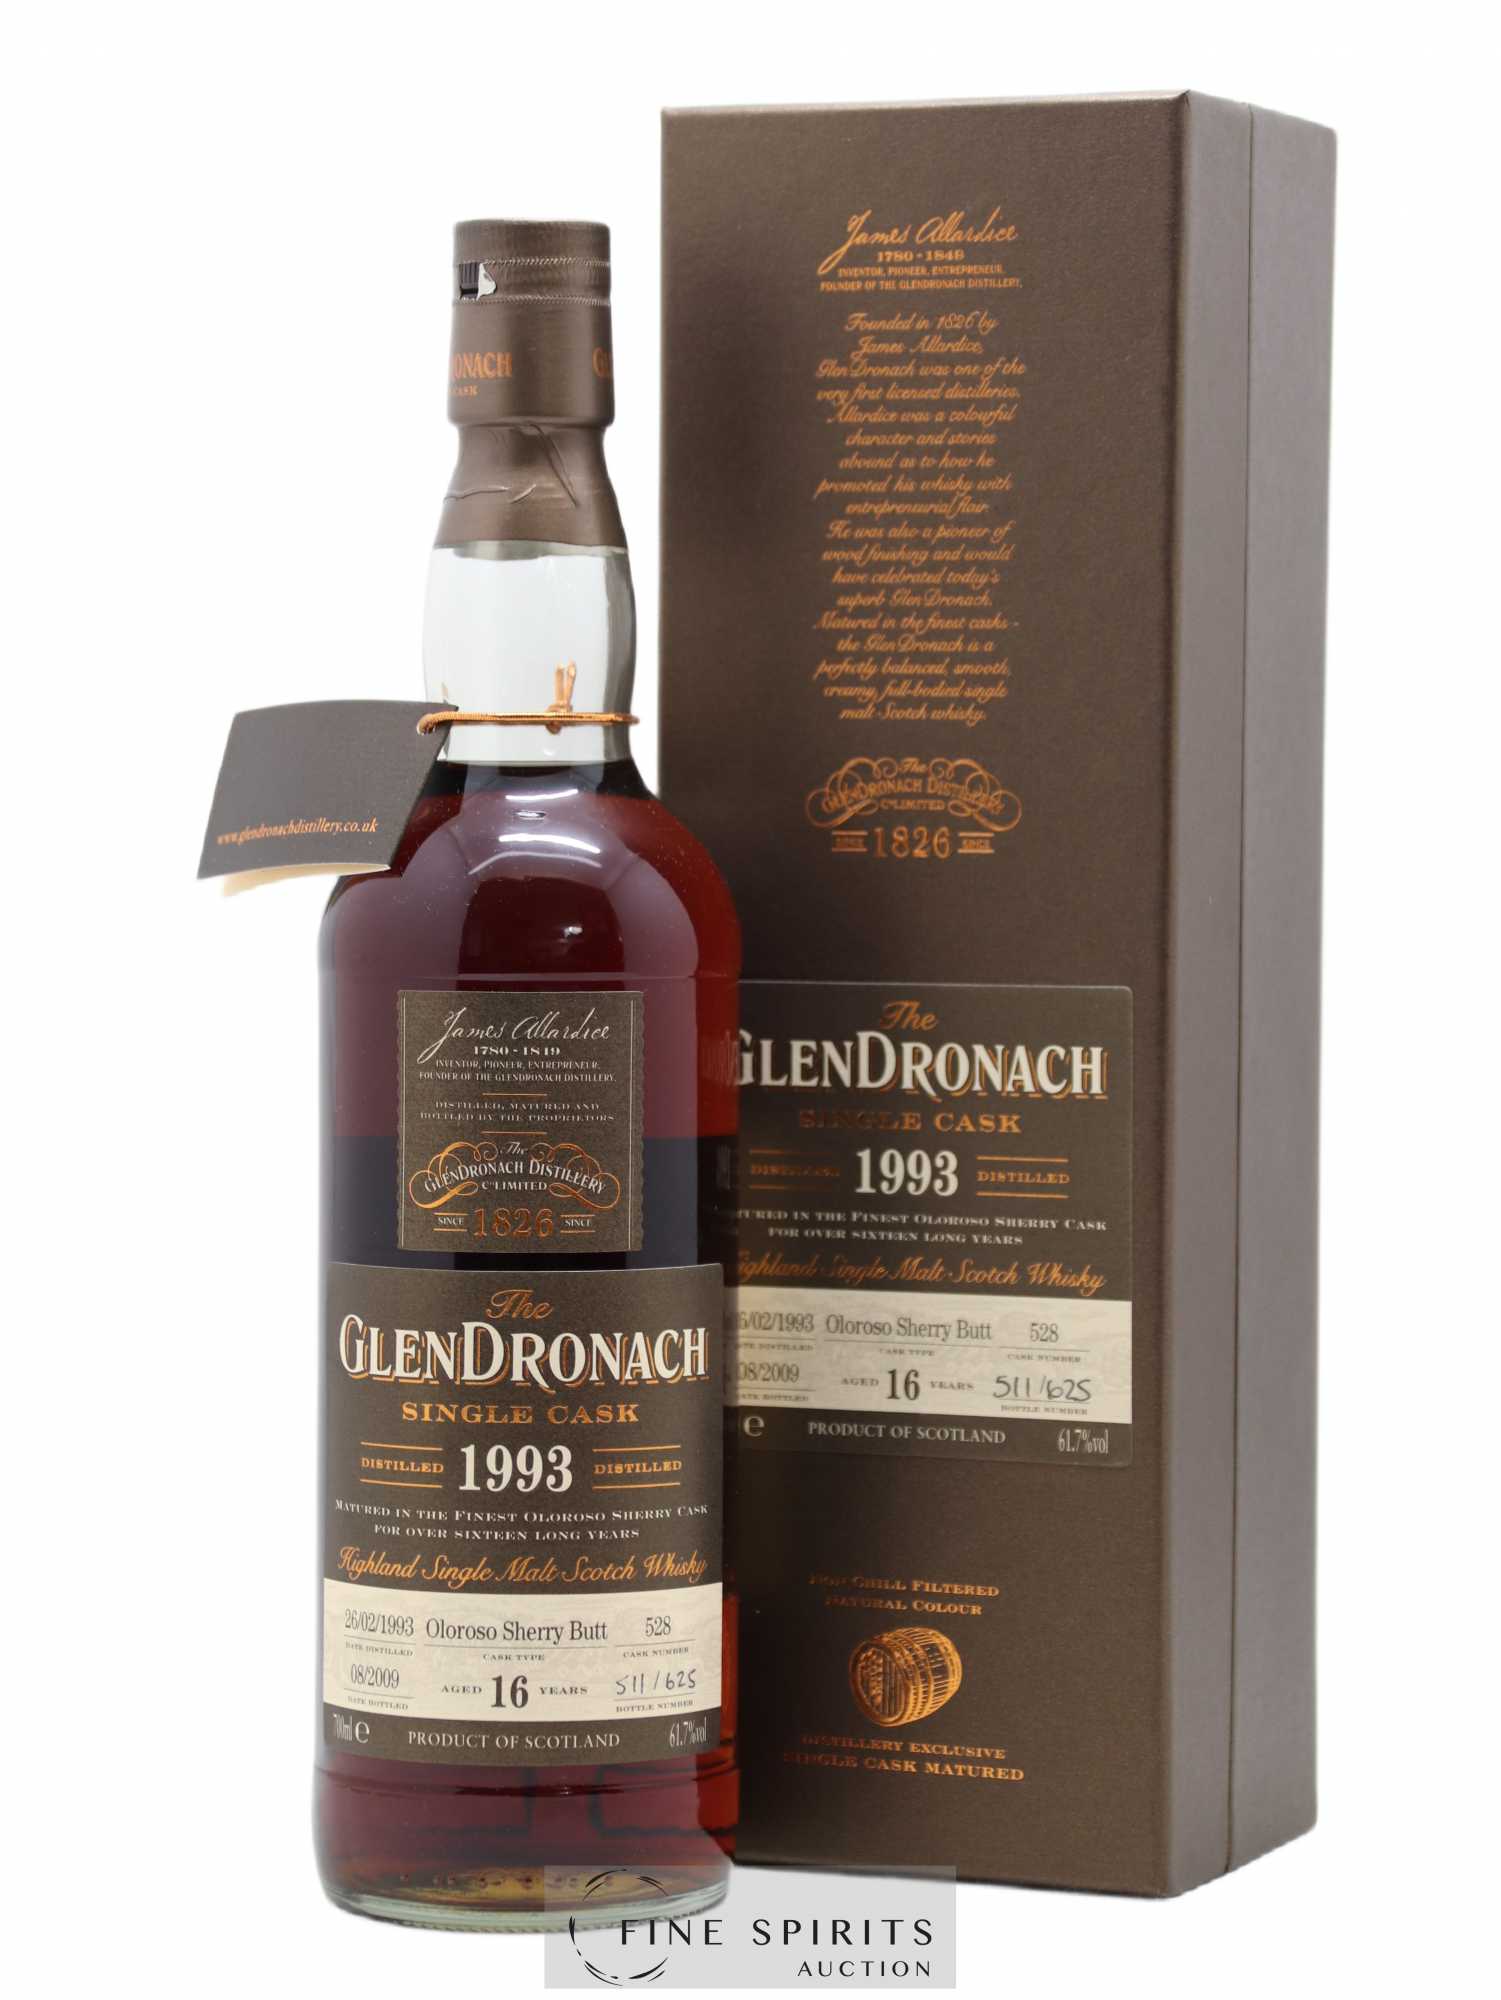 Glendronach 16 years 1993 Of. Oloroso Sherry Butt n°528 - One of 625 - bottled 2009 